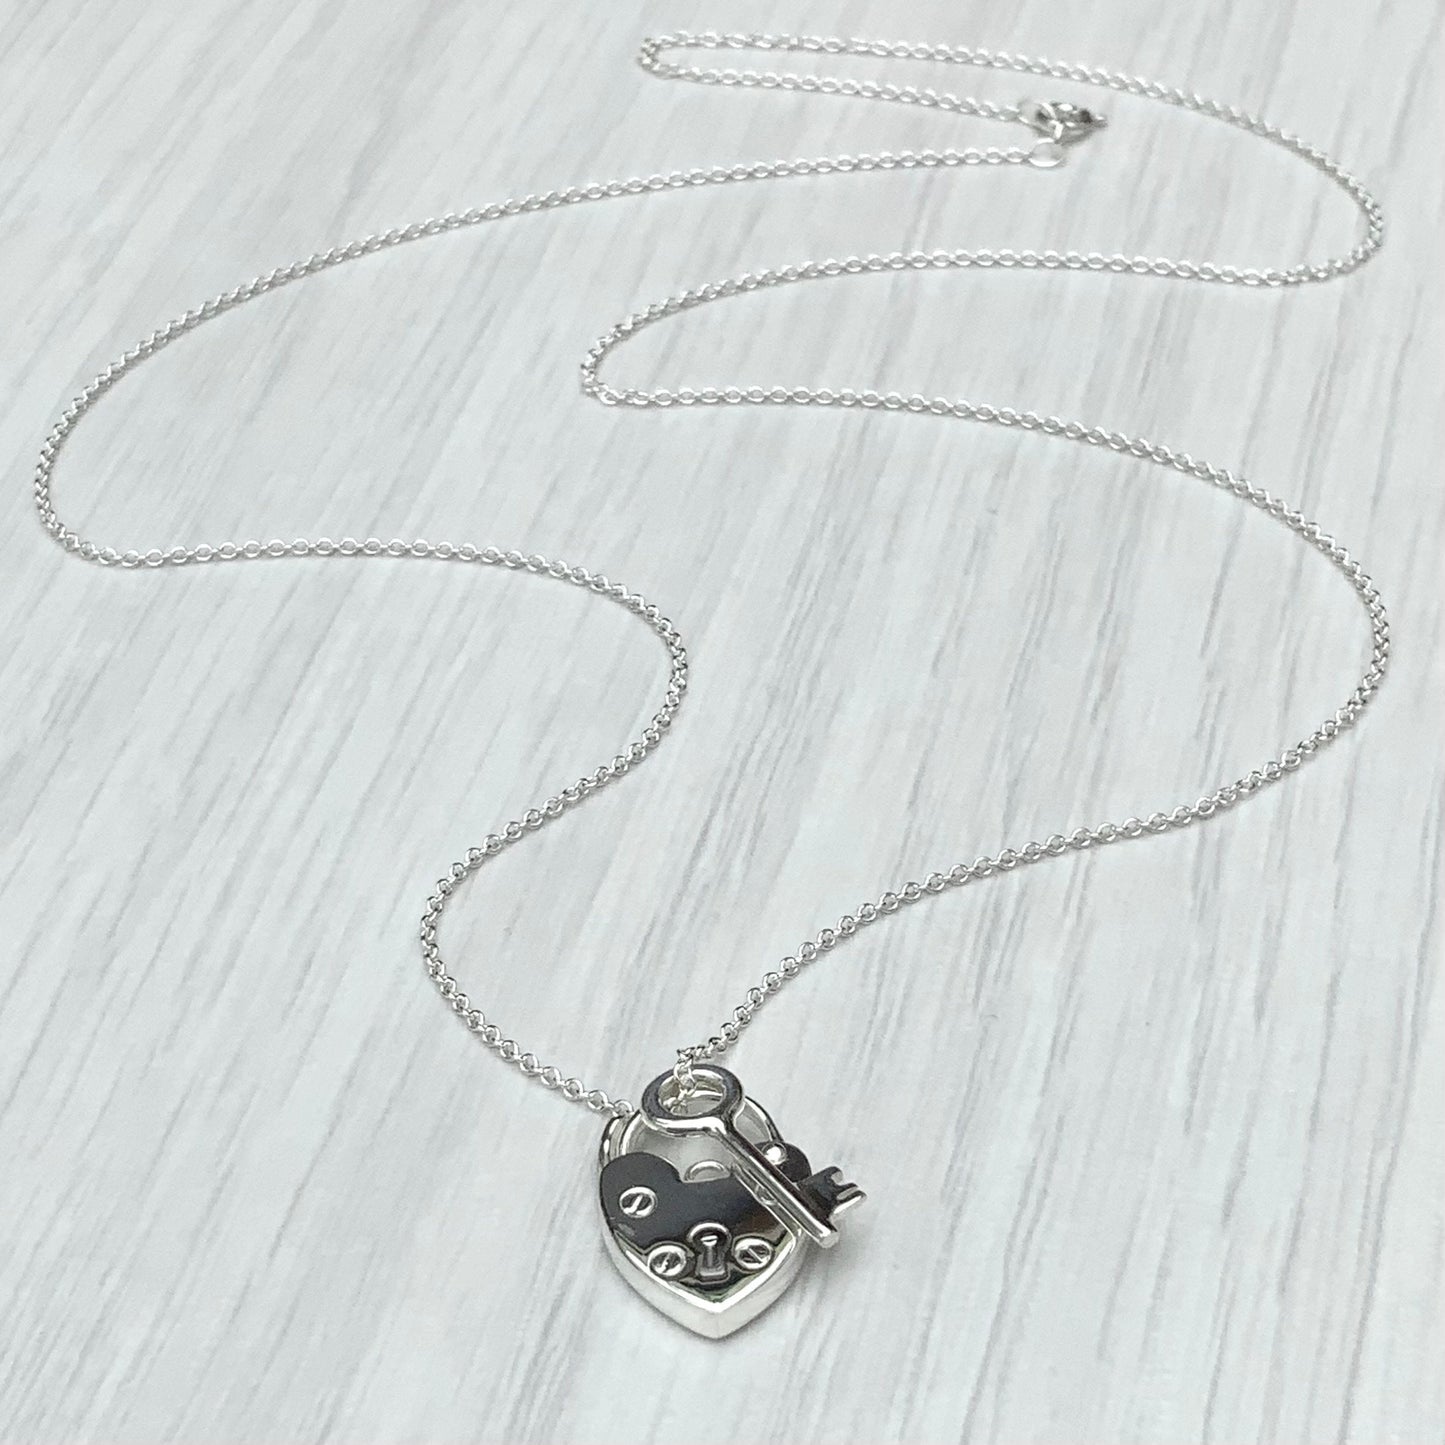 Solid silver heart padlock and dainty key charm pendant on a trace chain